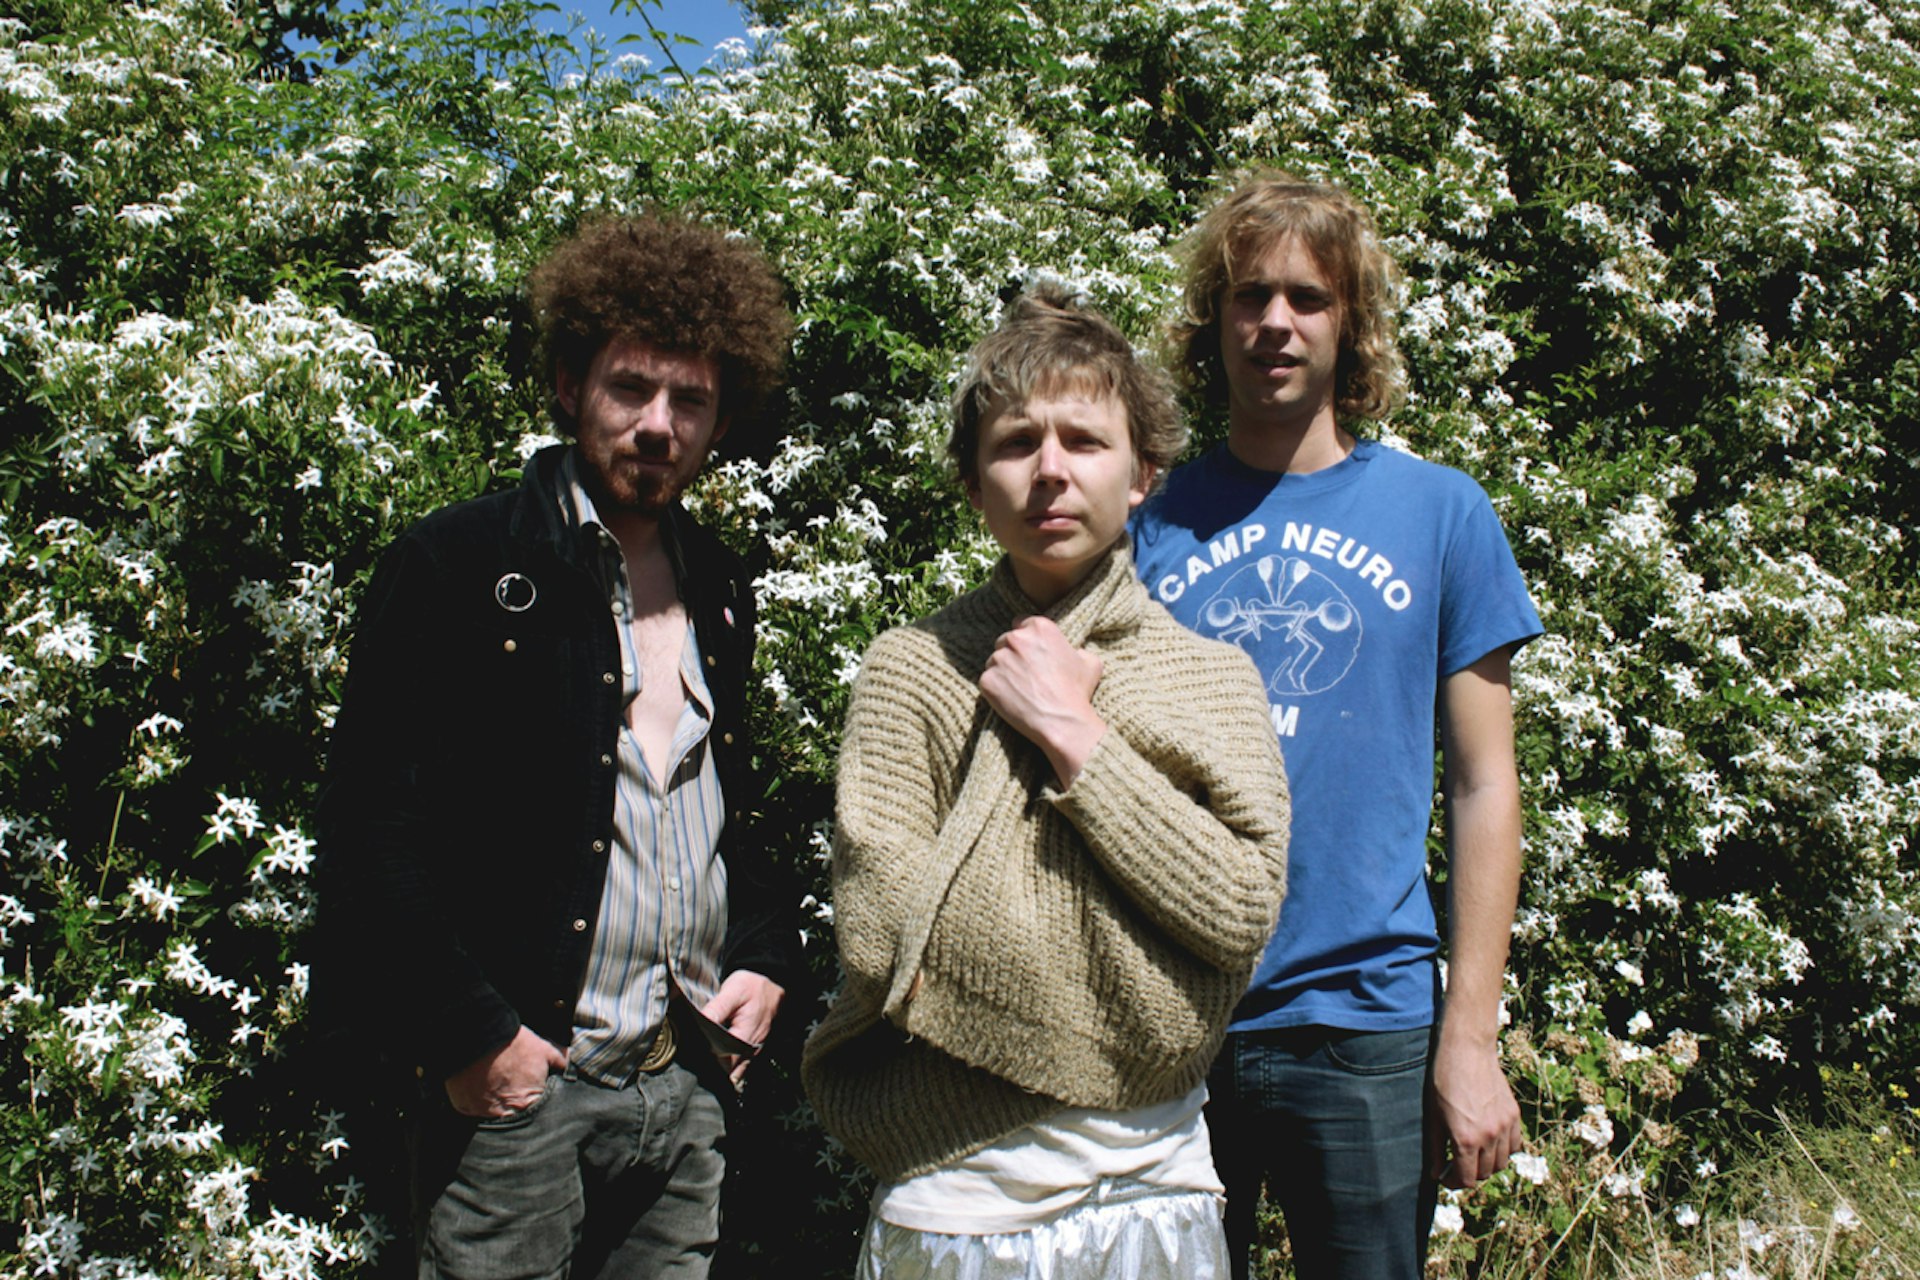 Australian band Pond on the revival of psychedelia